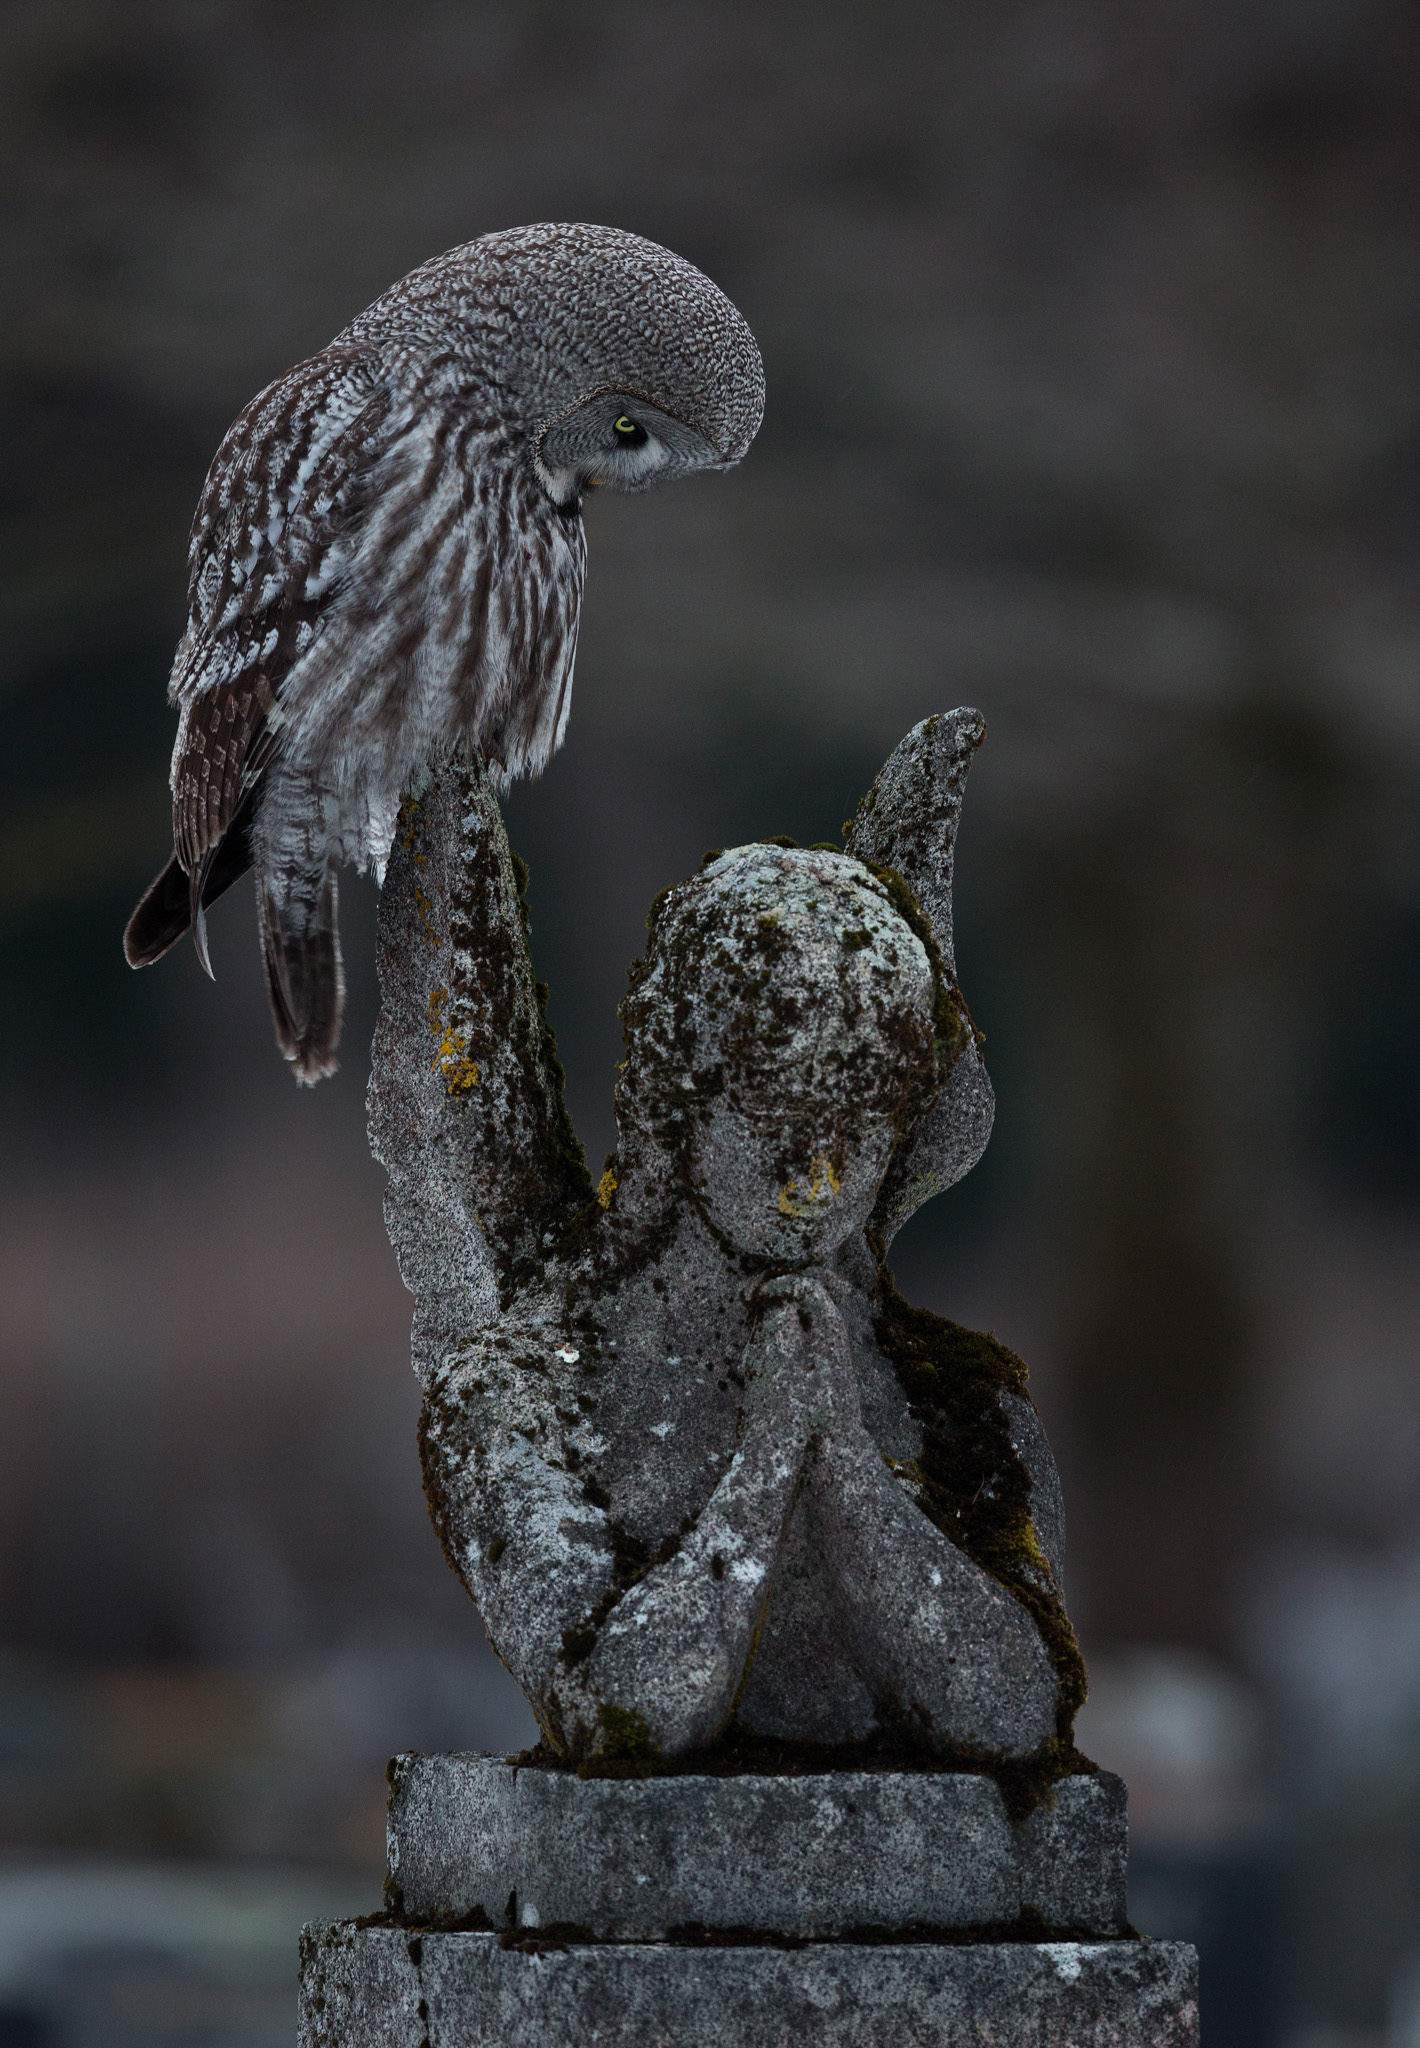 A owl sits on a statue of a praying angel, it's head bowed as if in prayer